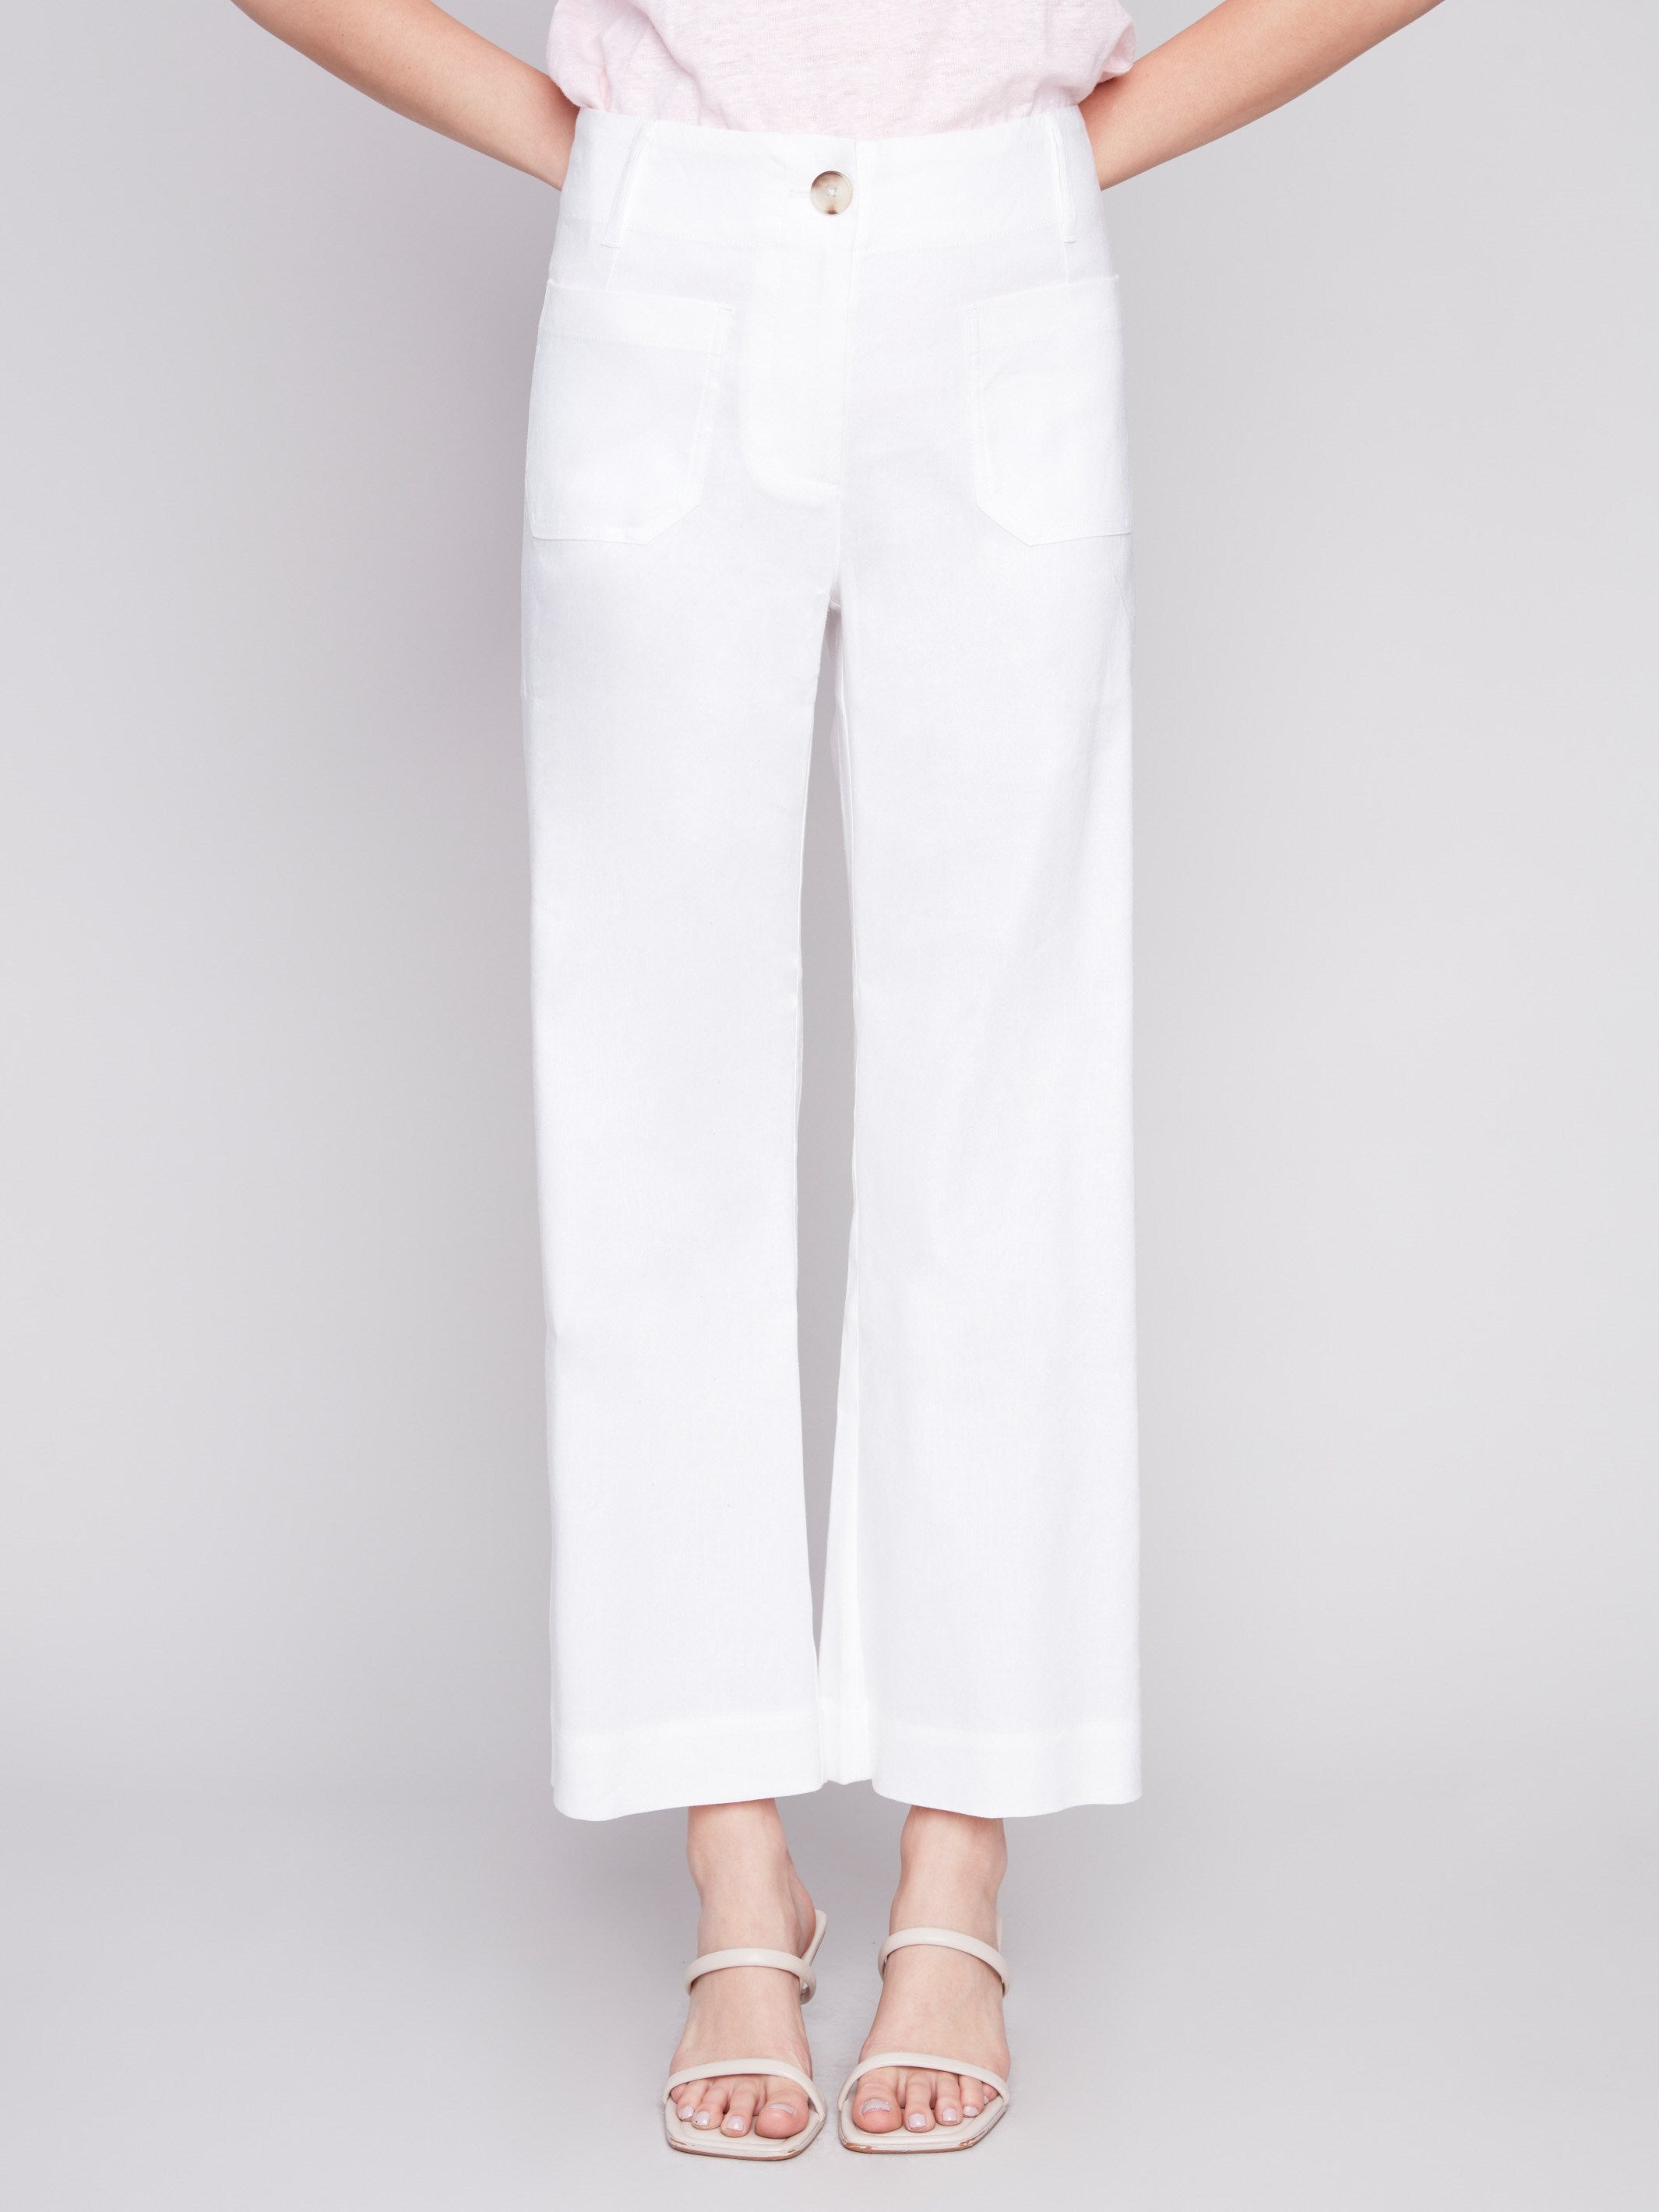 Cropped Linen Blend Pants - White - Charlie B Collection Canada - Image 7